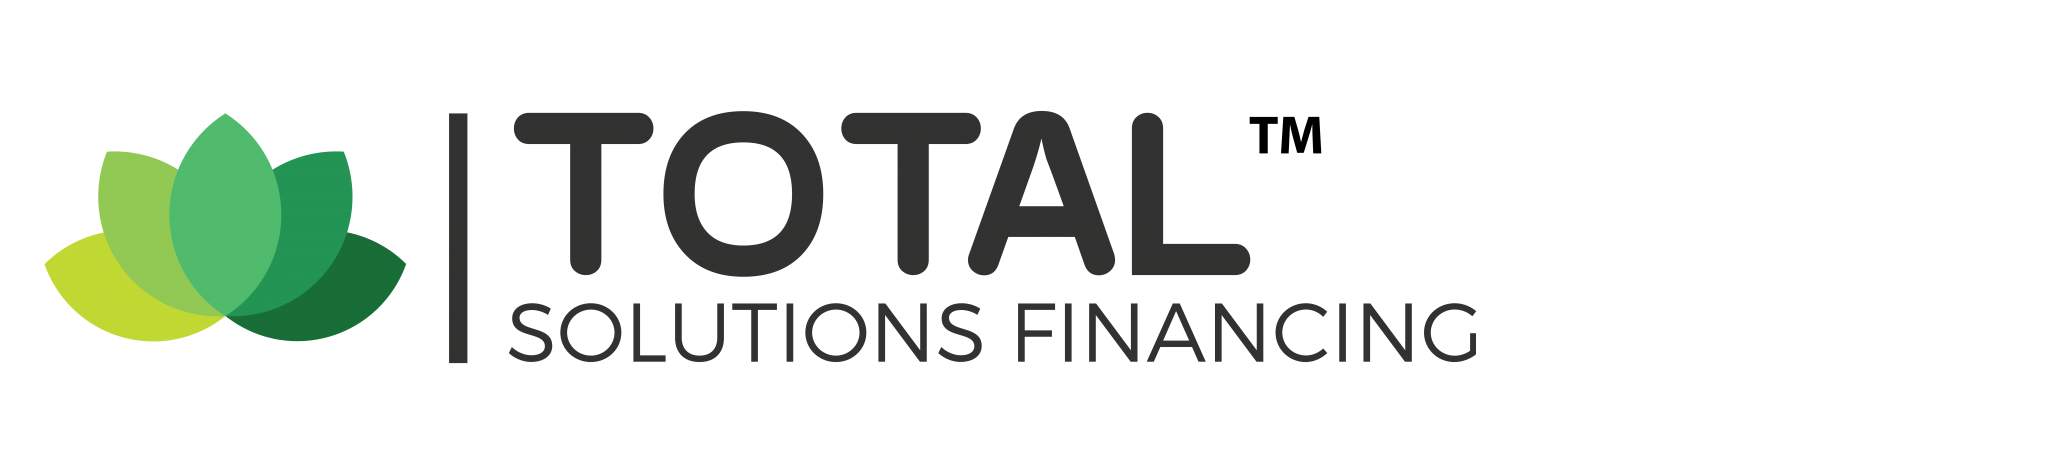 Total Solution Financing For All Of Your Dealership Needs